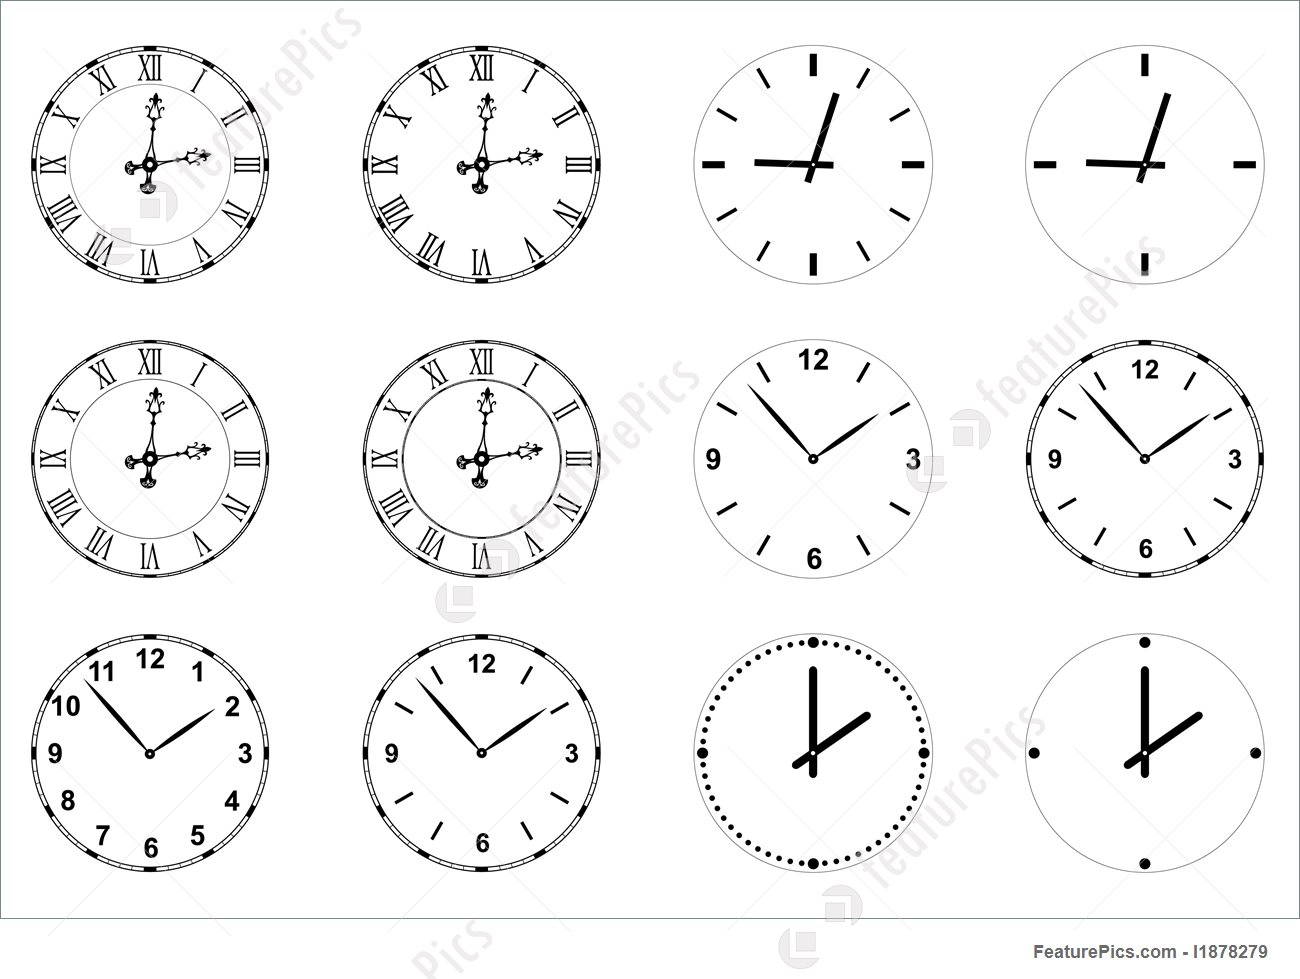 Roman Numeral Clock Face Vector at GetDrawings | Free download